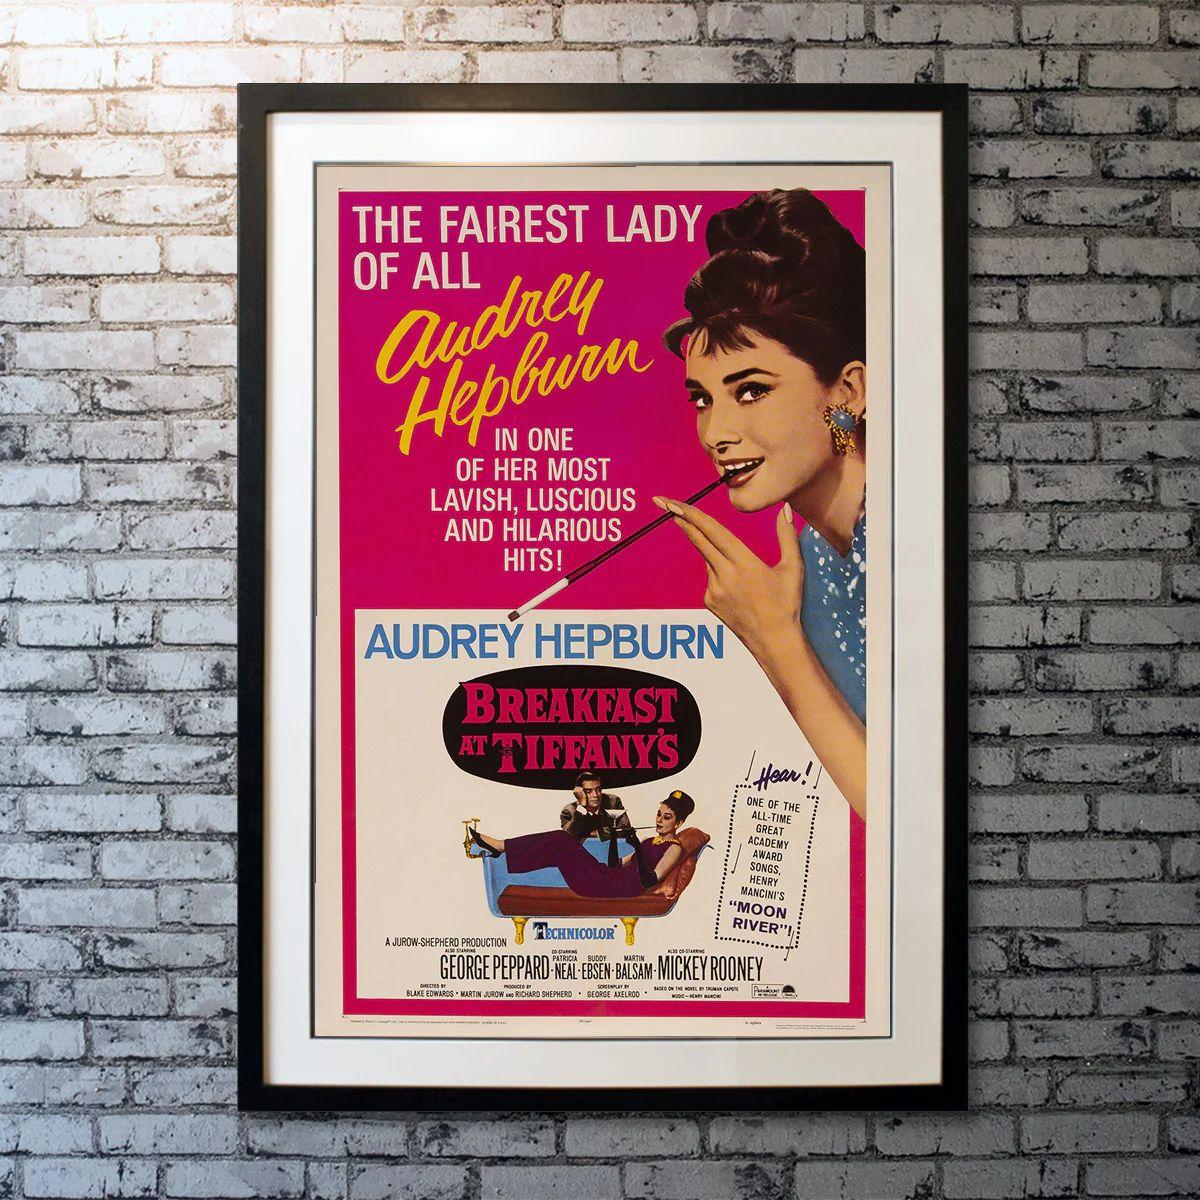 Breakfast At Tiffany's, Unframed Poster, 1965R

Original US One Sheet (27 X 41 Inches). Classic 1961 film, re-released to capitalise on Audrey Hepburn's success in 